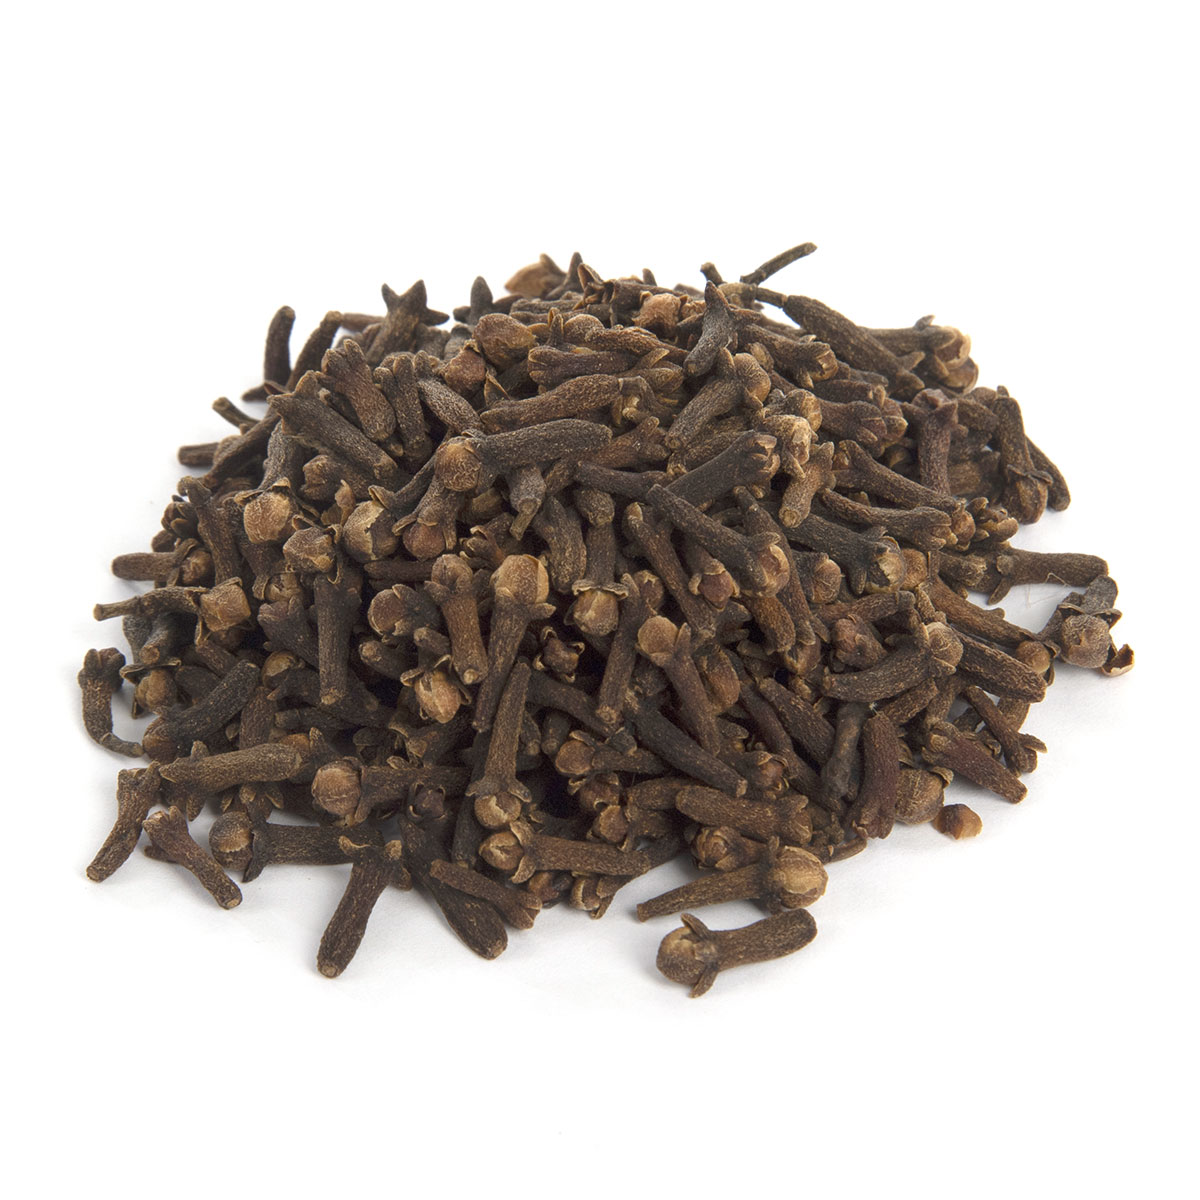 Herbs for Catering - Cloves Whole